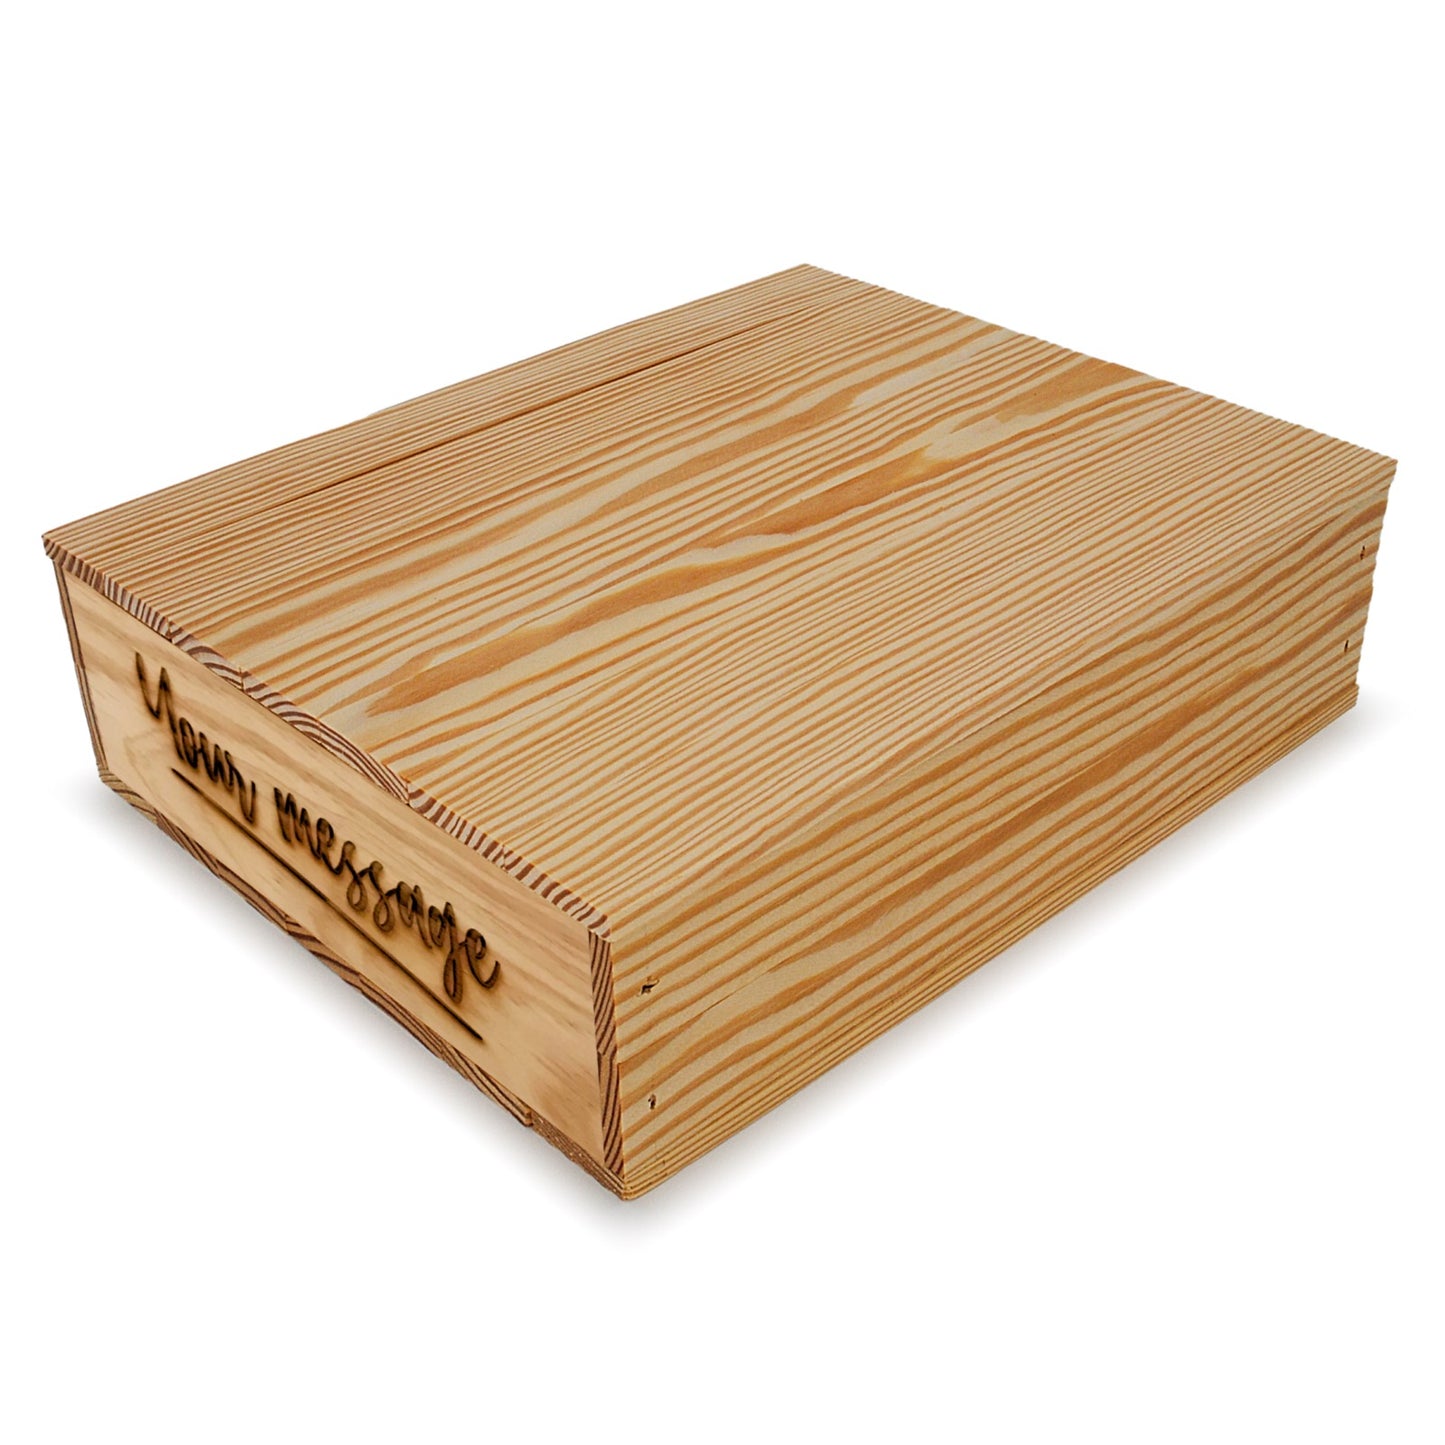 Small wooden crate with lid and custom message 14x11.5x3.5, 6-BX-14-11.5-3.5-ST-NW-LL, 12-BX-14-11.5-3.5-ST-NW-LL, 24-BX-14-11.5-3.5-ST-NW-LL, 48-BX-14-11.5-3.5-ST-NW-LL, 96-BX-14-11.5-3.5-ST-NW-LL